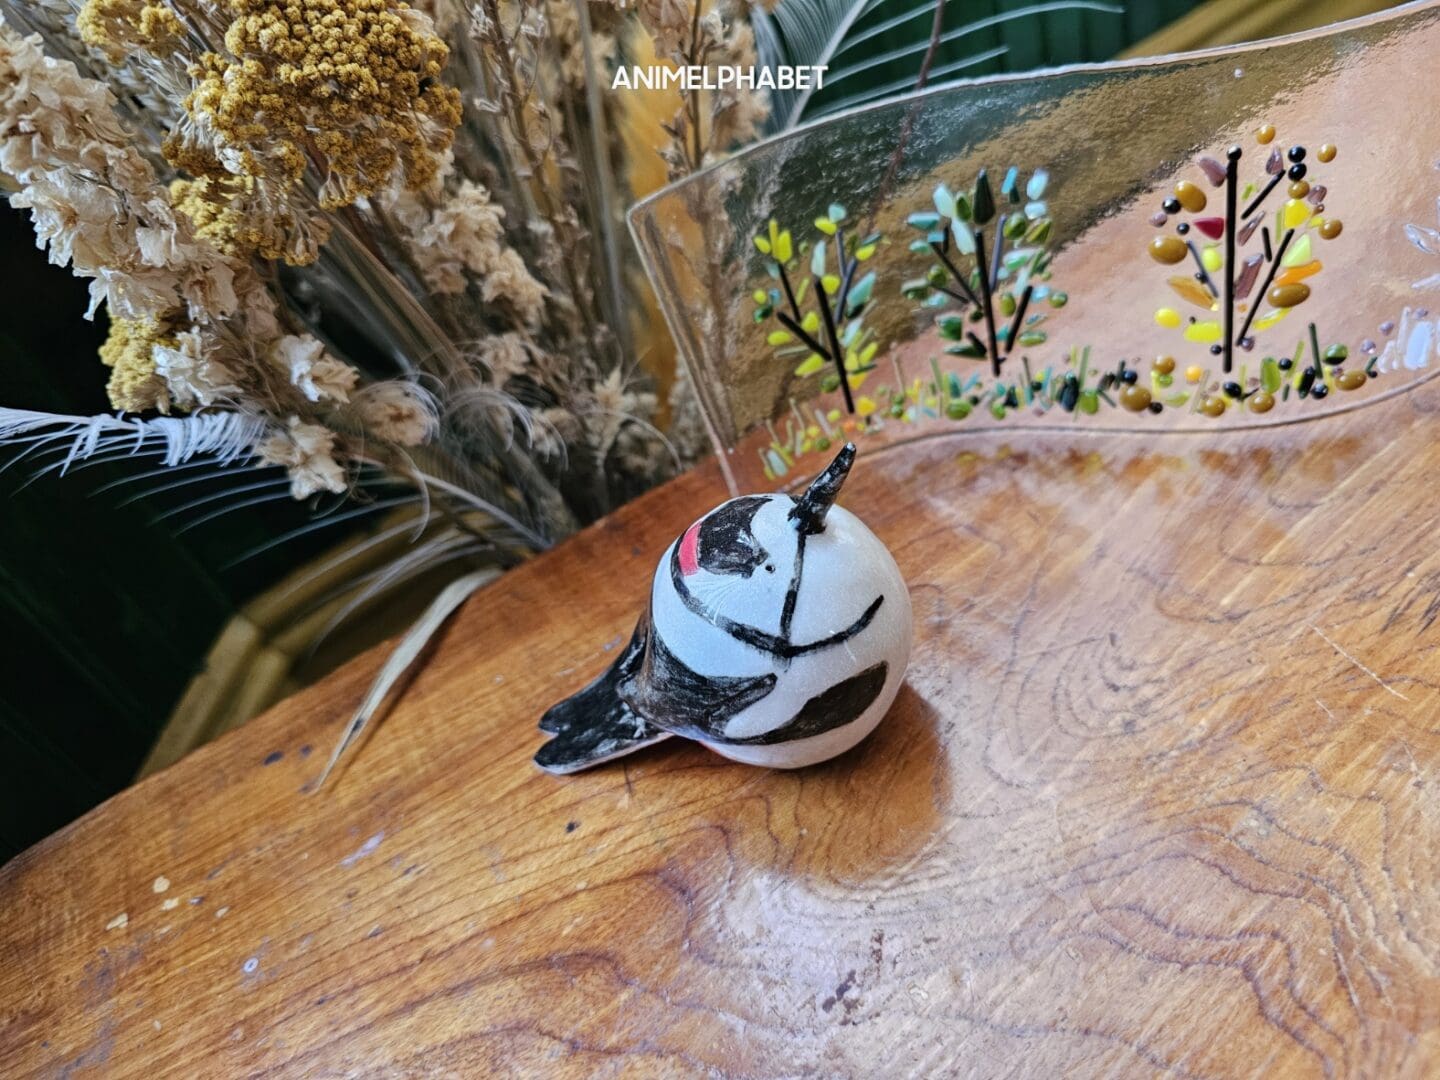 Ceramic great spotted woodpecker on a wooden table with dried flowers and glass art in the background